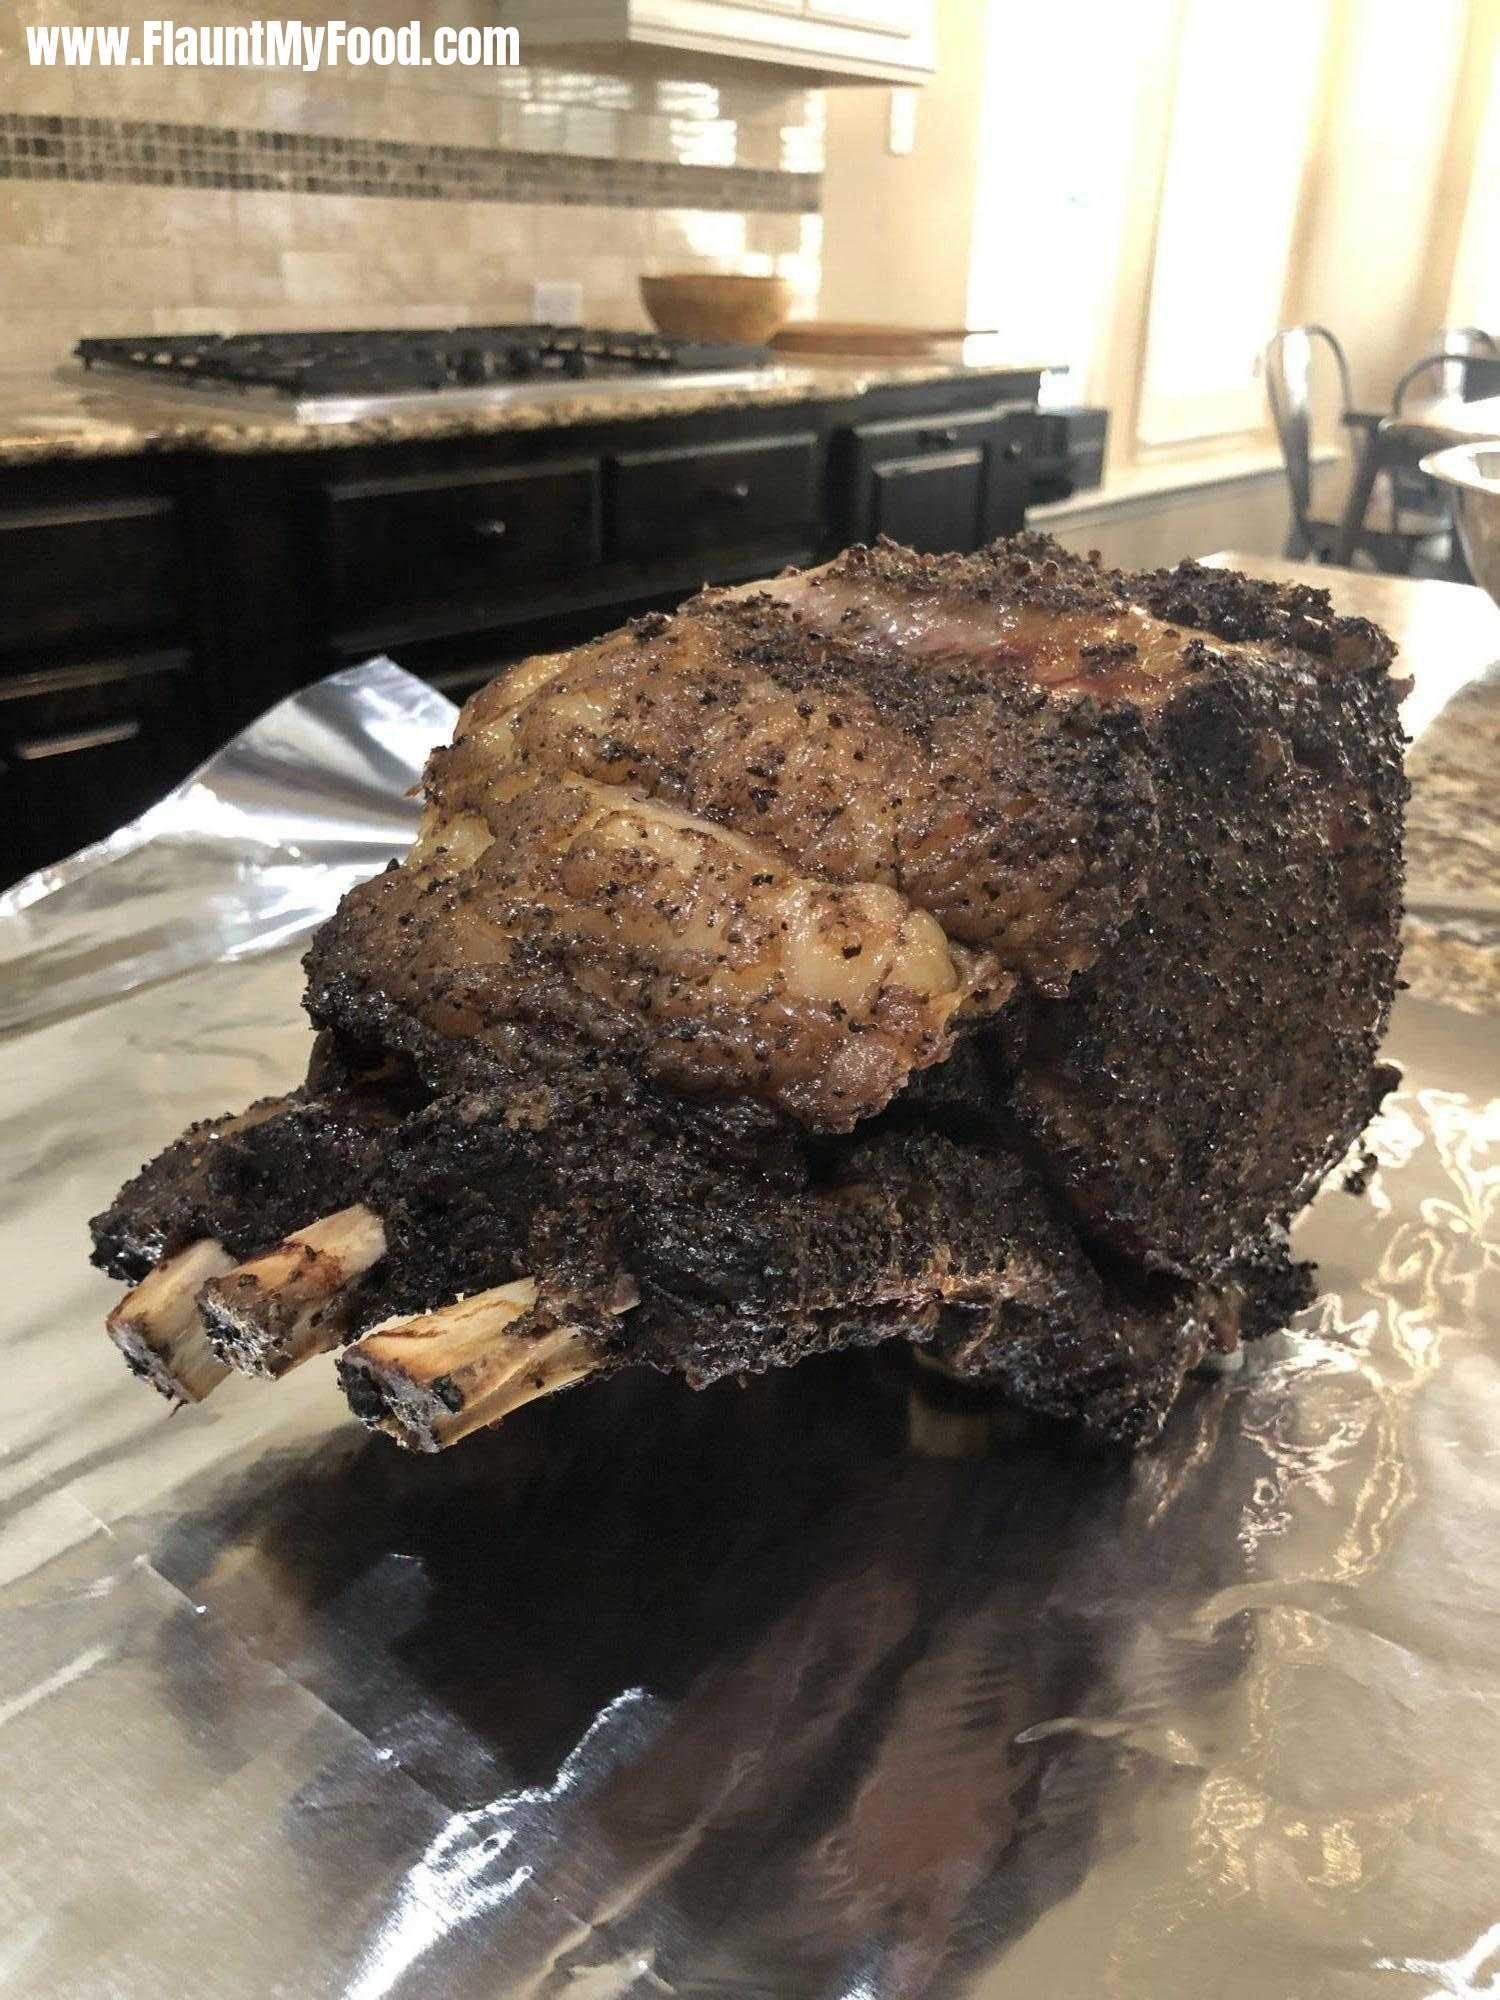 Smoked prime rib by Candyman in Fort Worth Texas on a green egg until the center reached 130° F